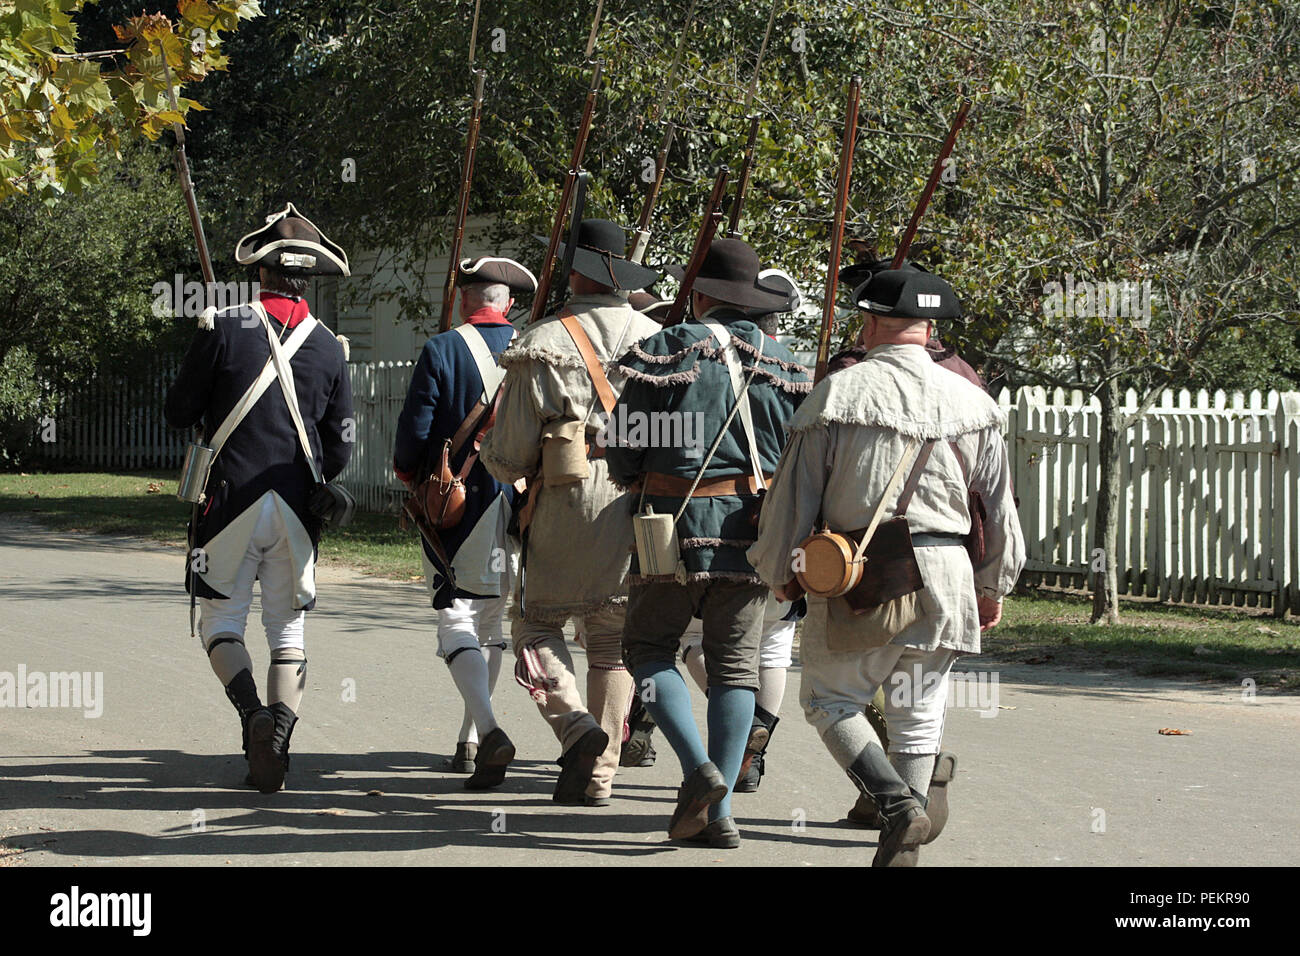 Continental army during the American Revolution. Historical reenactment at Colonial Williamsburg, Virginia. Stock Photo